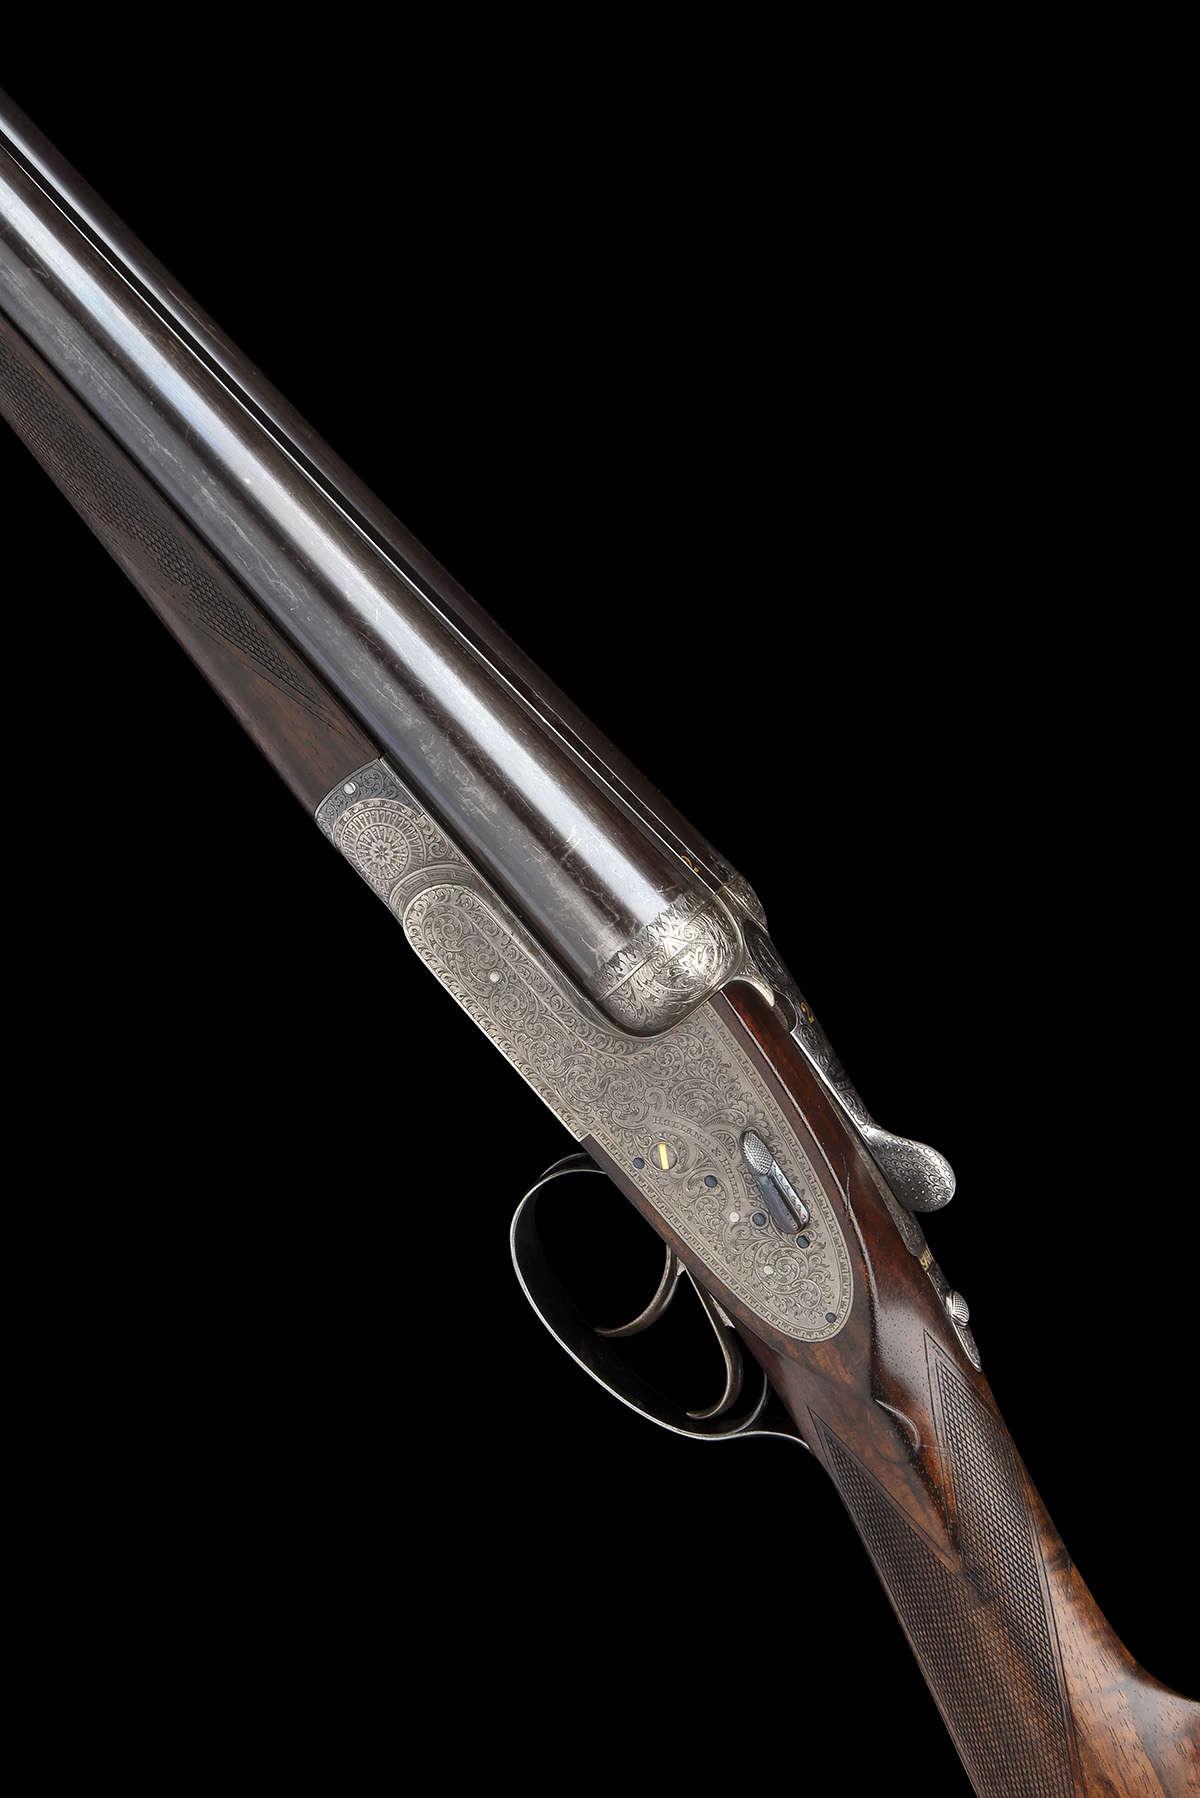 HOLLAND & HOLLAND A 12-BORE 'ROYAL' SELF-OPENING HAND-DETACHABLE SIDELOCK EJECTOR, serial no. 30890,